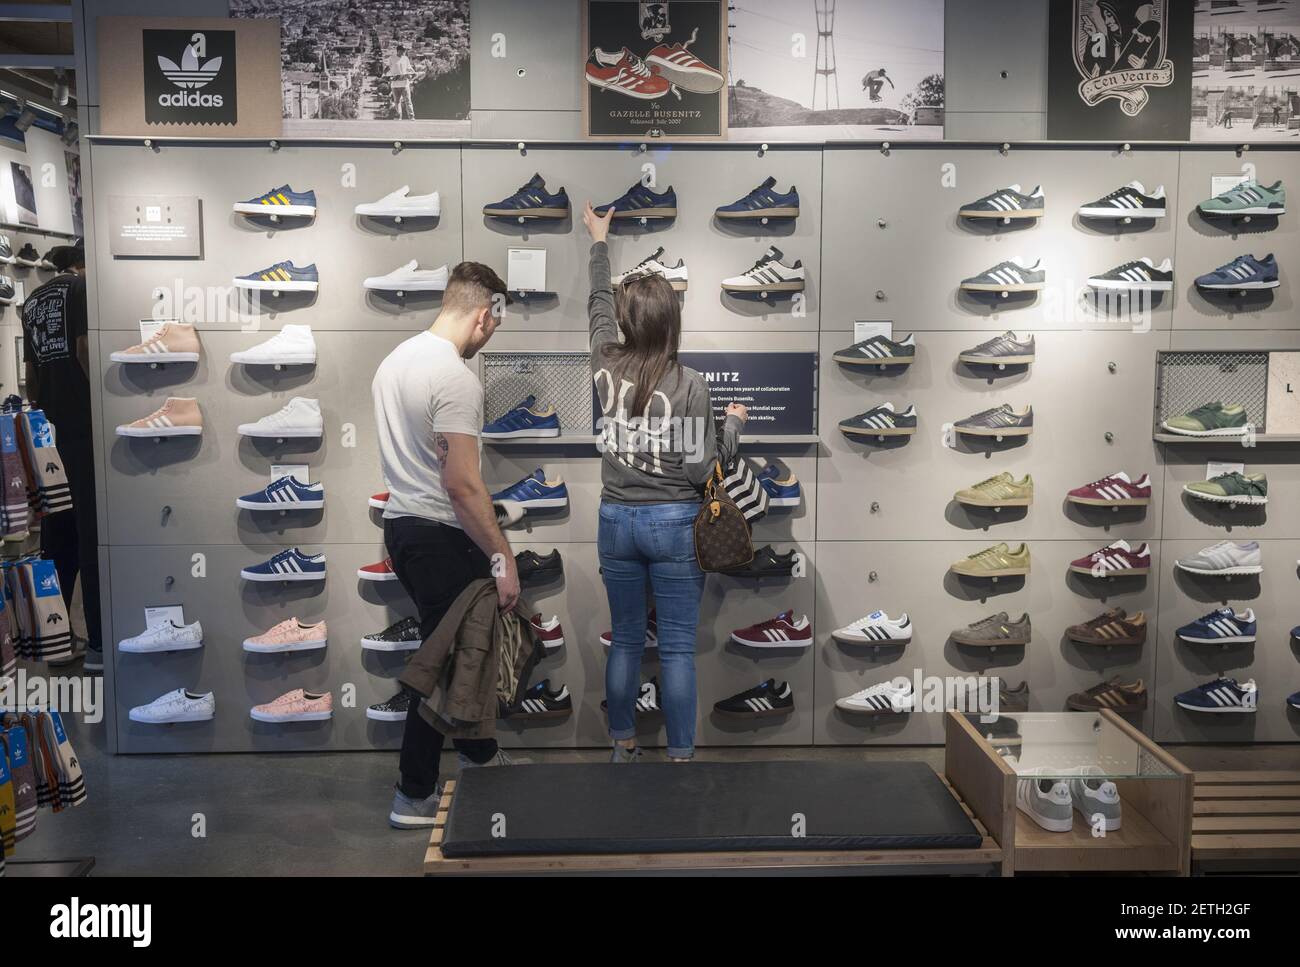 Customers browse footwear in the Adidas flagship store on Fifth Avenue in New  York on Tuesday, February 28, 2017. Consumer confidence is reported to be  at the highest level since July 2001.(Photo